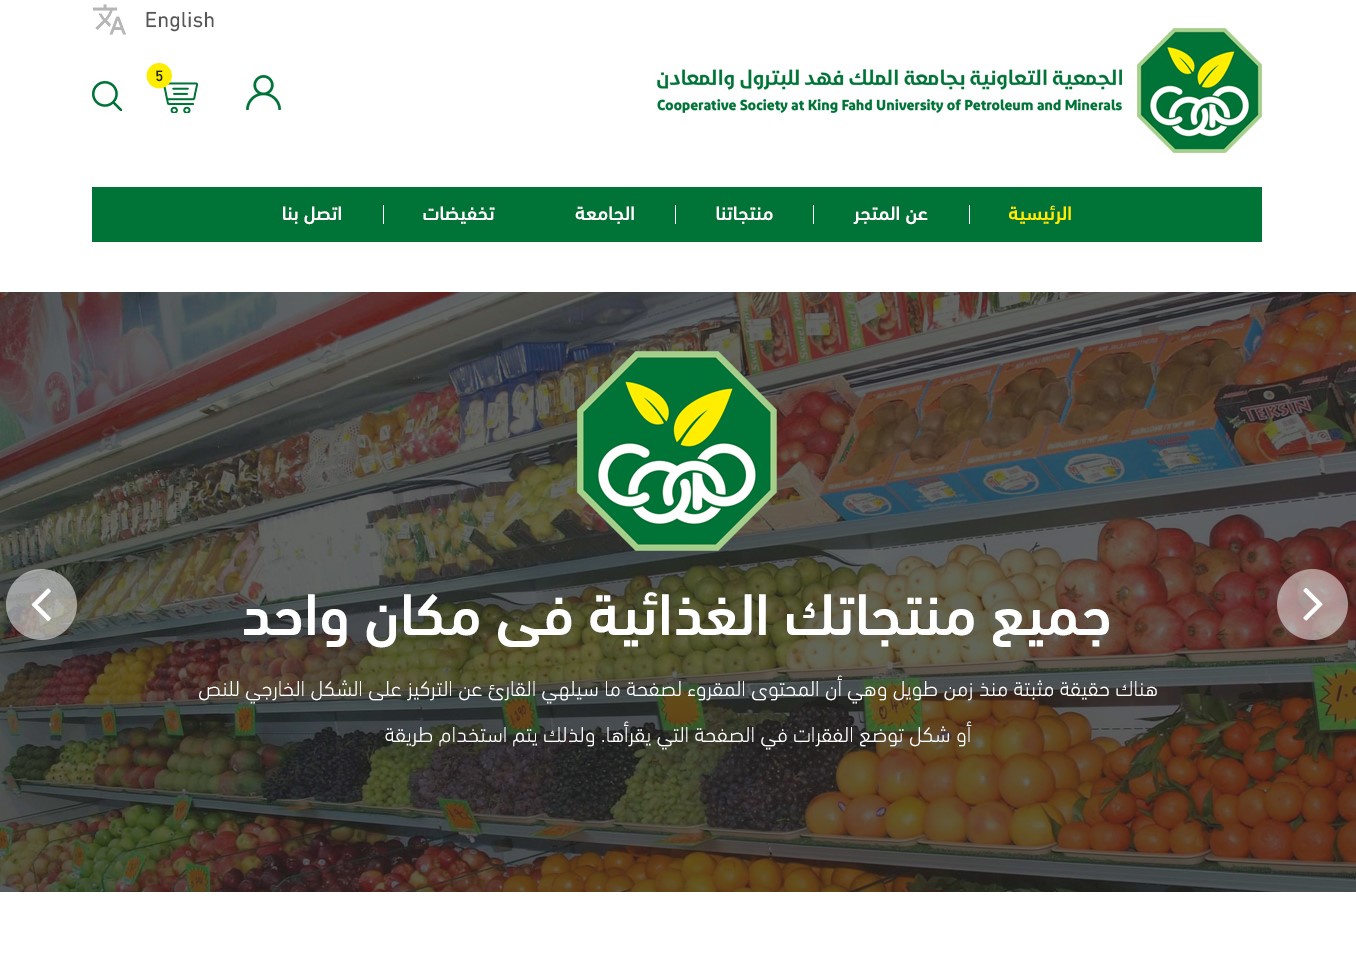  Cooperative Society Store, King Fahd University of Petroleum and Minerals